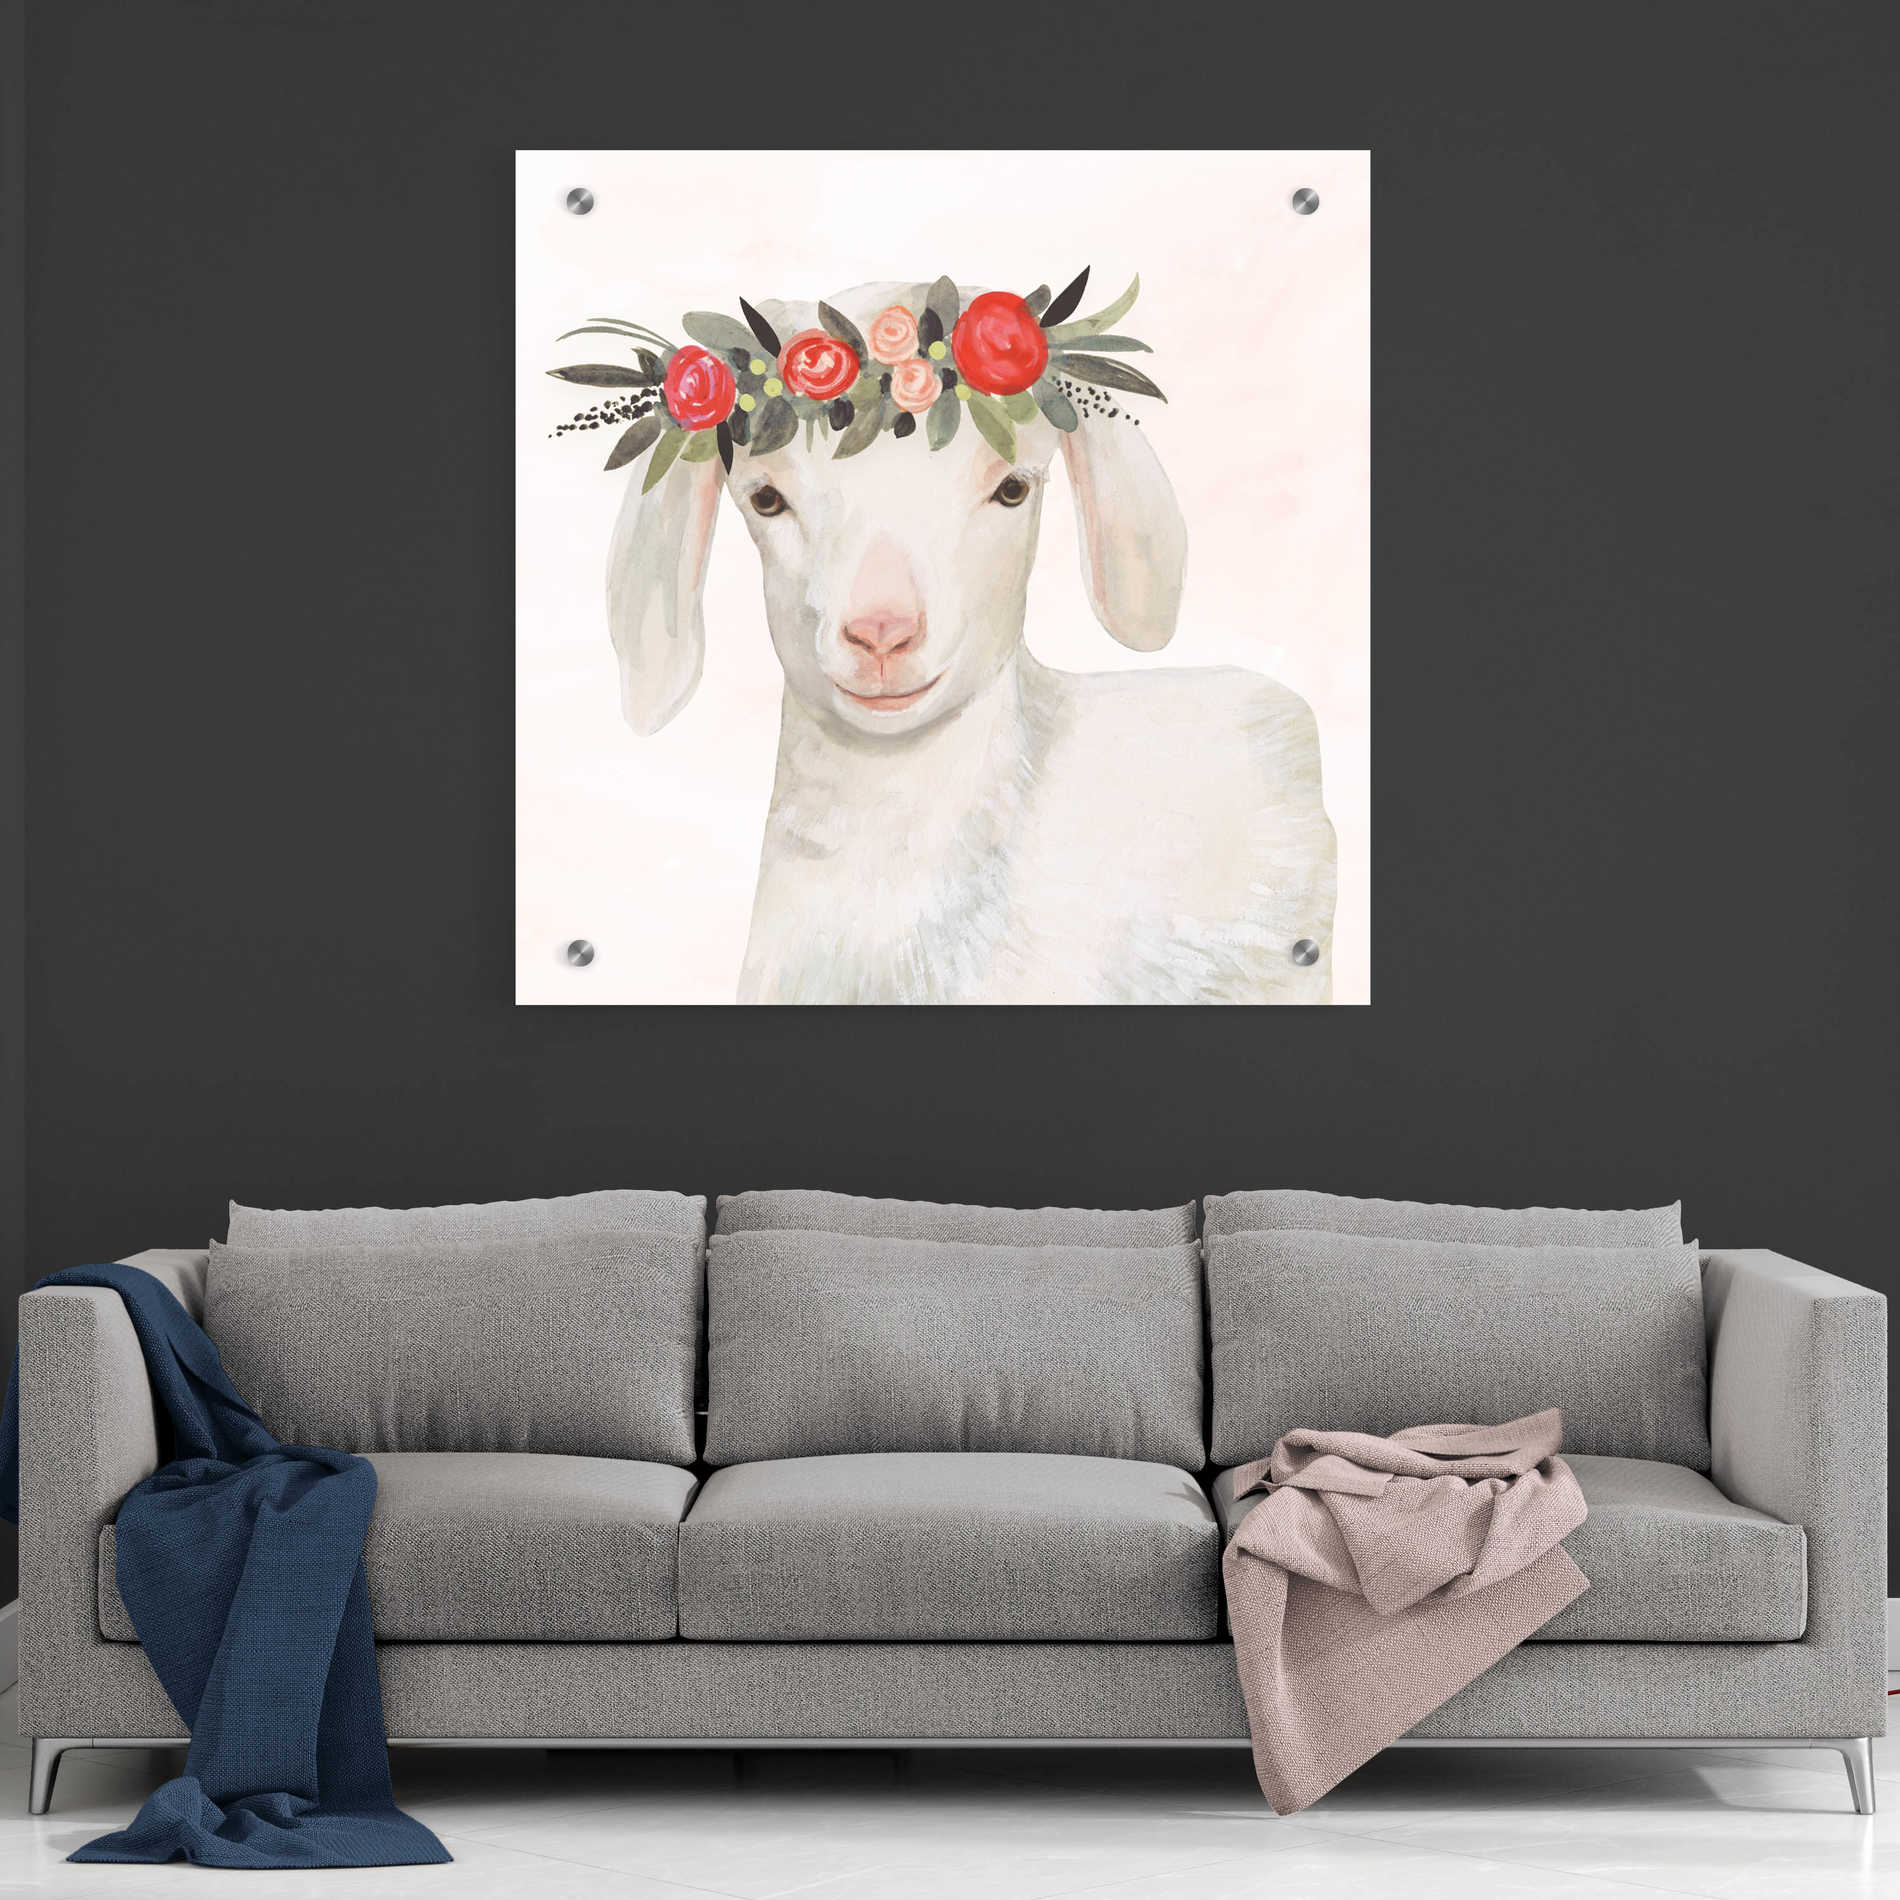 Epic Art 'Garden Goat IV' by Victoria Borges, Acrylic Glass Wall Art,36x36